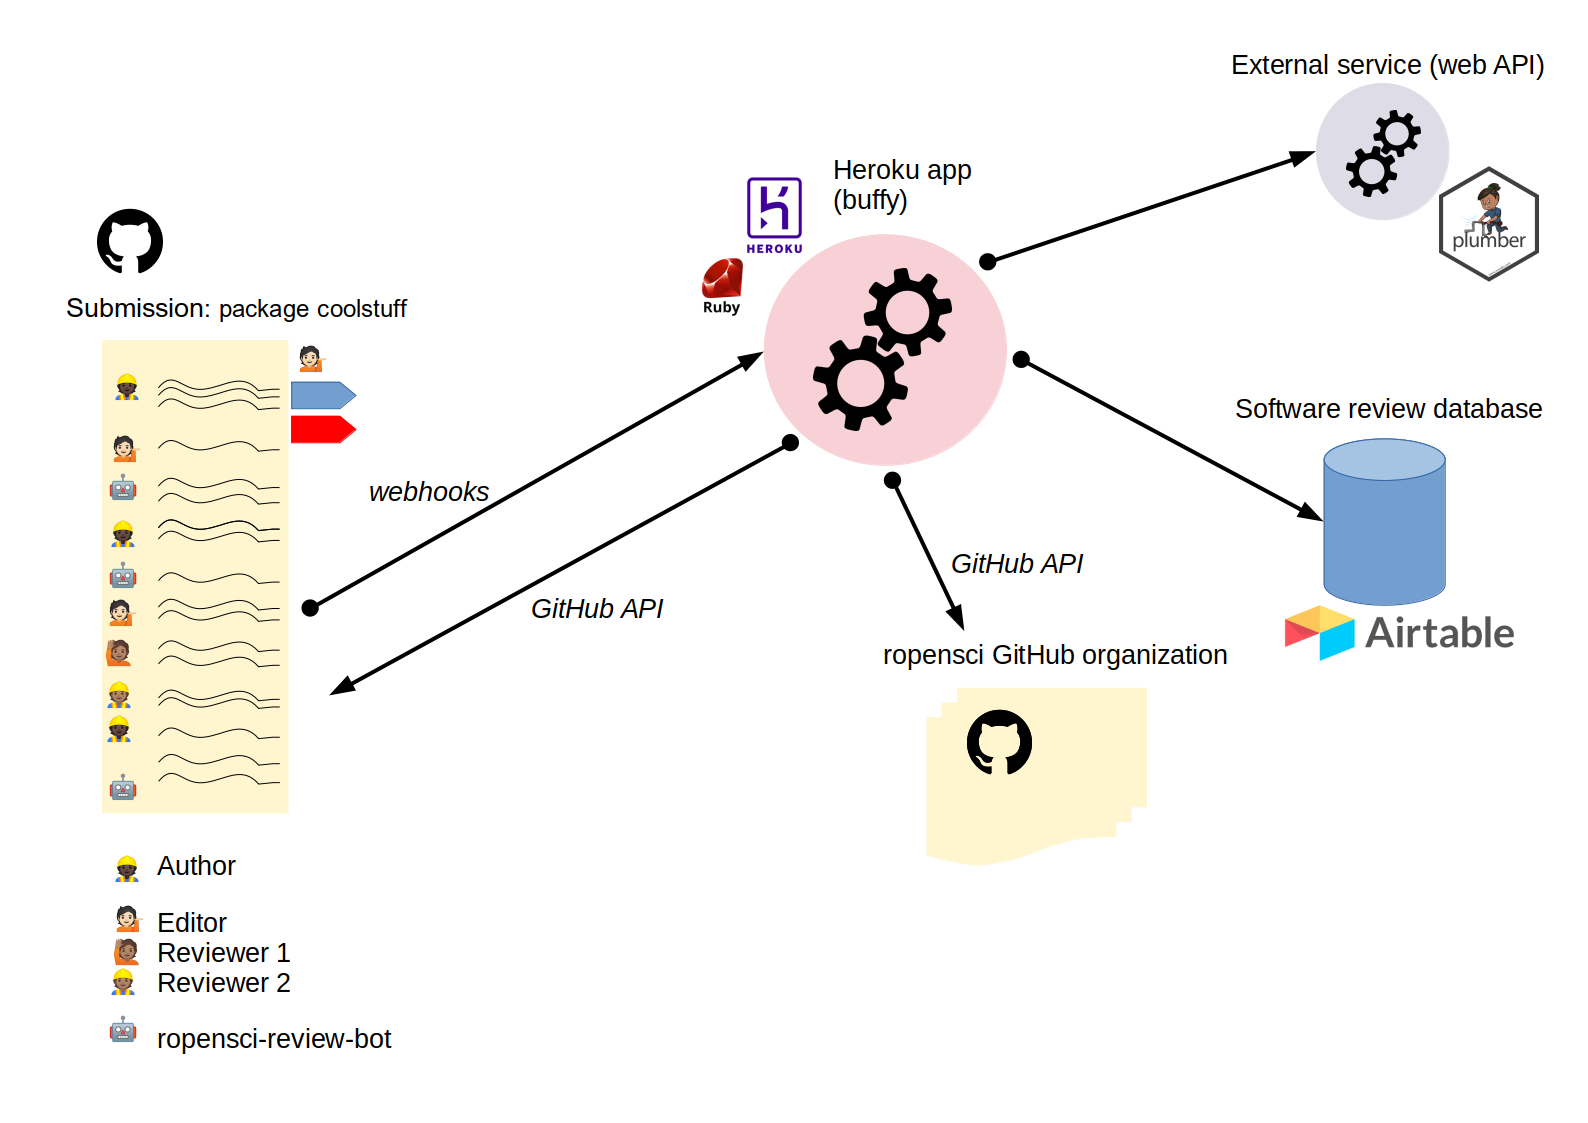 Diagram representing automation for rOpenSci software peer review. On the left, a GitHub issue thread with emojis as avatars, and wobbly lines as text. Under the GitHub issue thread, a legend indicating who among the emojis is Author /Editor / Reviewer / ropensci-review-bot. At the center of the diagram is an Heroku app using the Buffy Ruby tool, that receives information from GitHub via webhooks. The app digests messages received and depending on the command pings an external service represented on the right (with a plumber logo); fills the Airtable-based software review database; manages ropensci GitHub organization via GitHub API; posts back or labels in the GitHub issue thread.